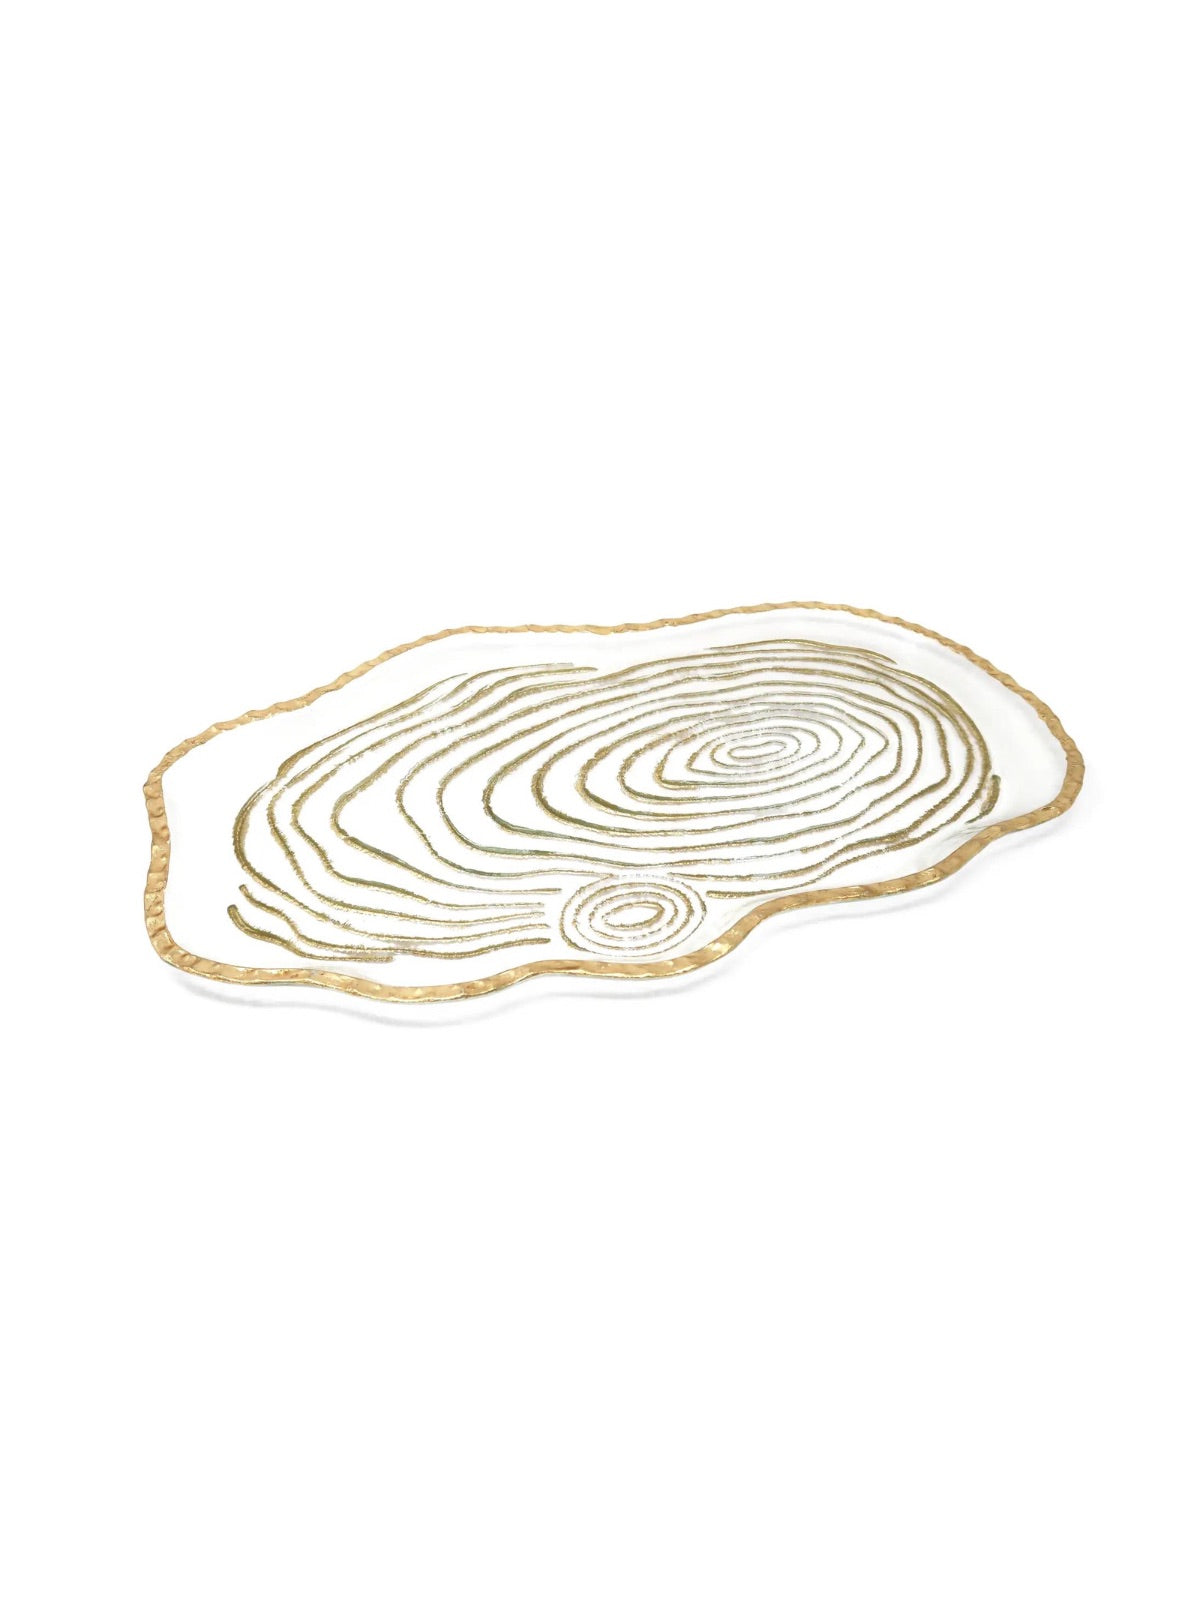 16 inch Glass Oval Tray with Gold Grained Design Sold by KYA Home Decor.